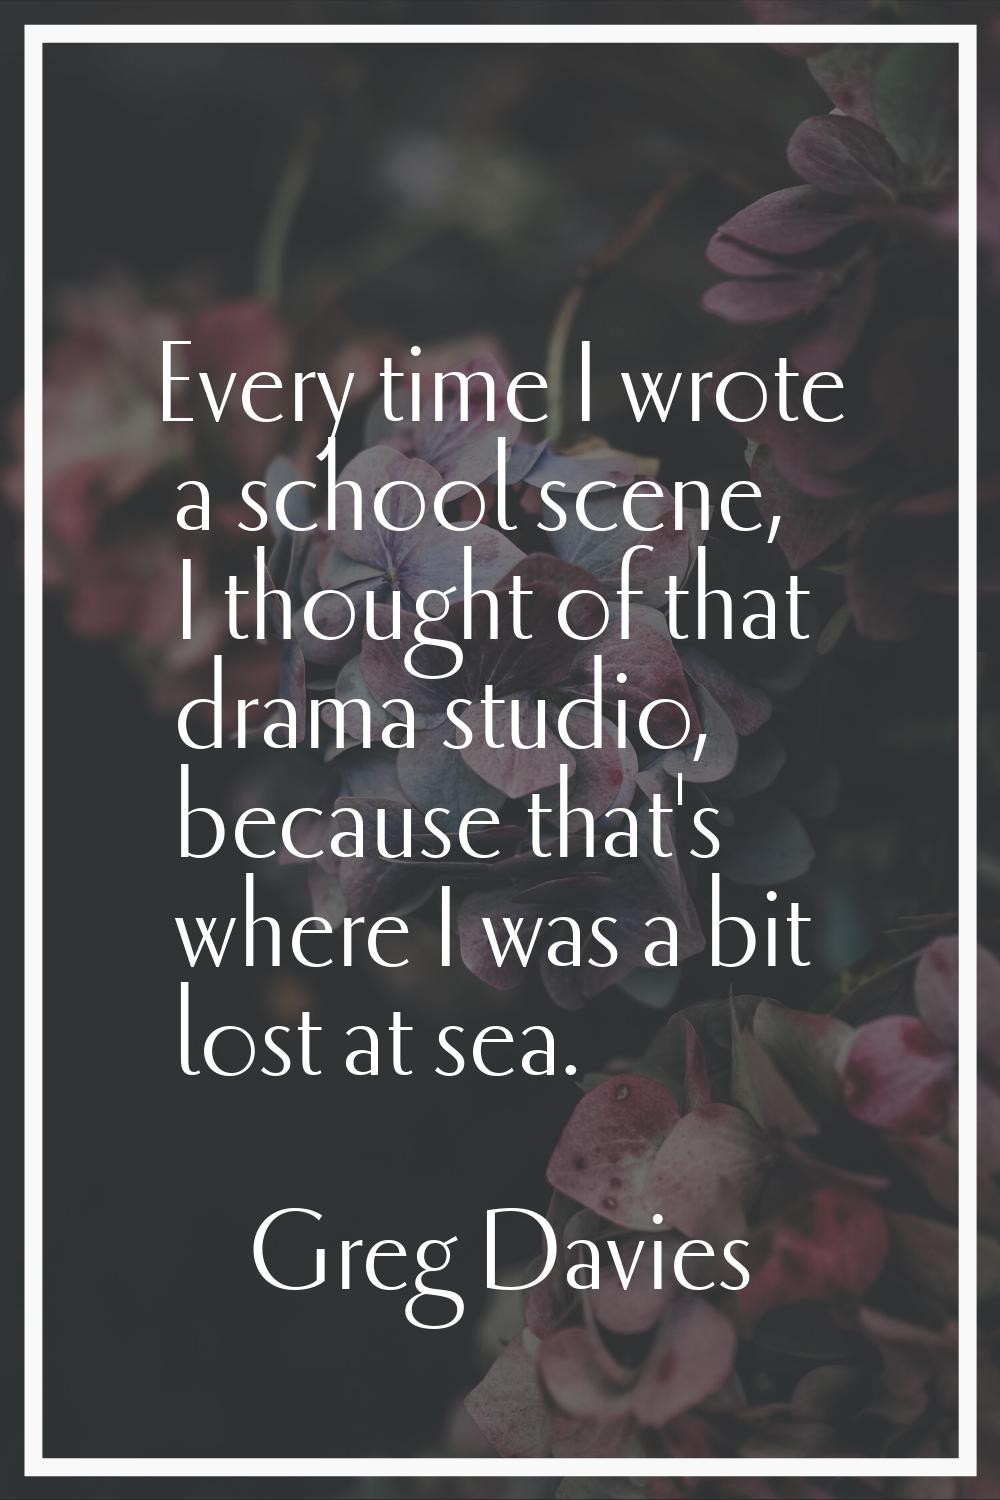 Every time I wrote a school scene, I thought of that drama studio, because that's where I was a bit